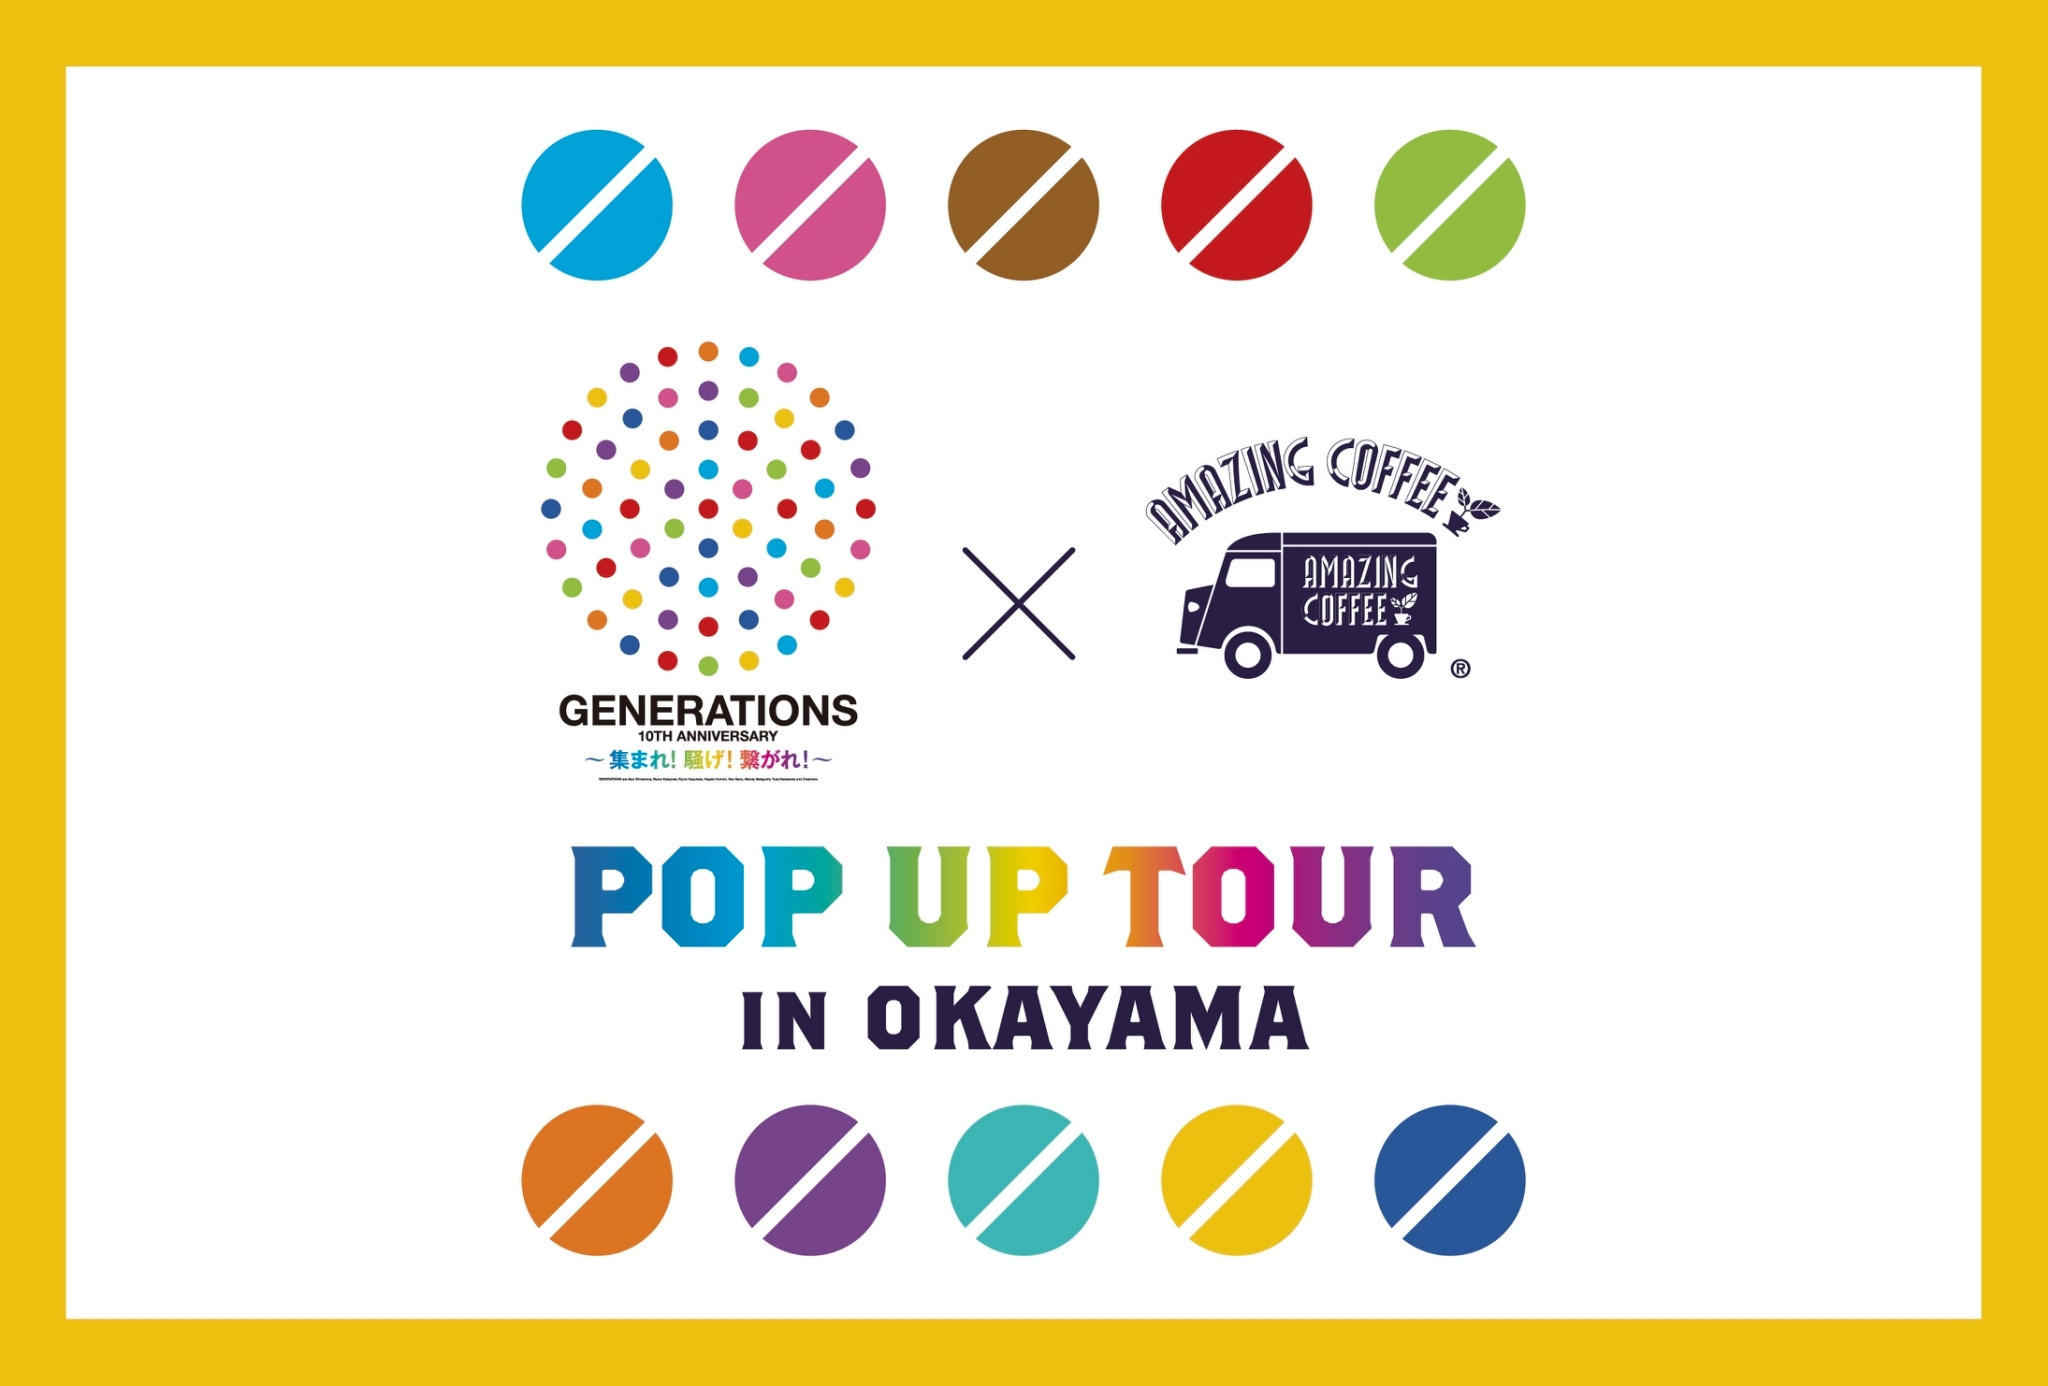 『GENERATIONS×AMAZING COFFEE POP UP TOUR 2023』in 岡山  11月2日(木)〜11月5日(日)くらしき桃子 倉敷市民会館店にて開催！